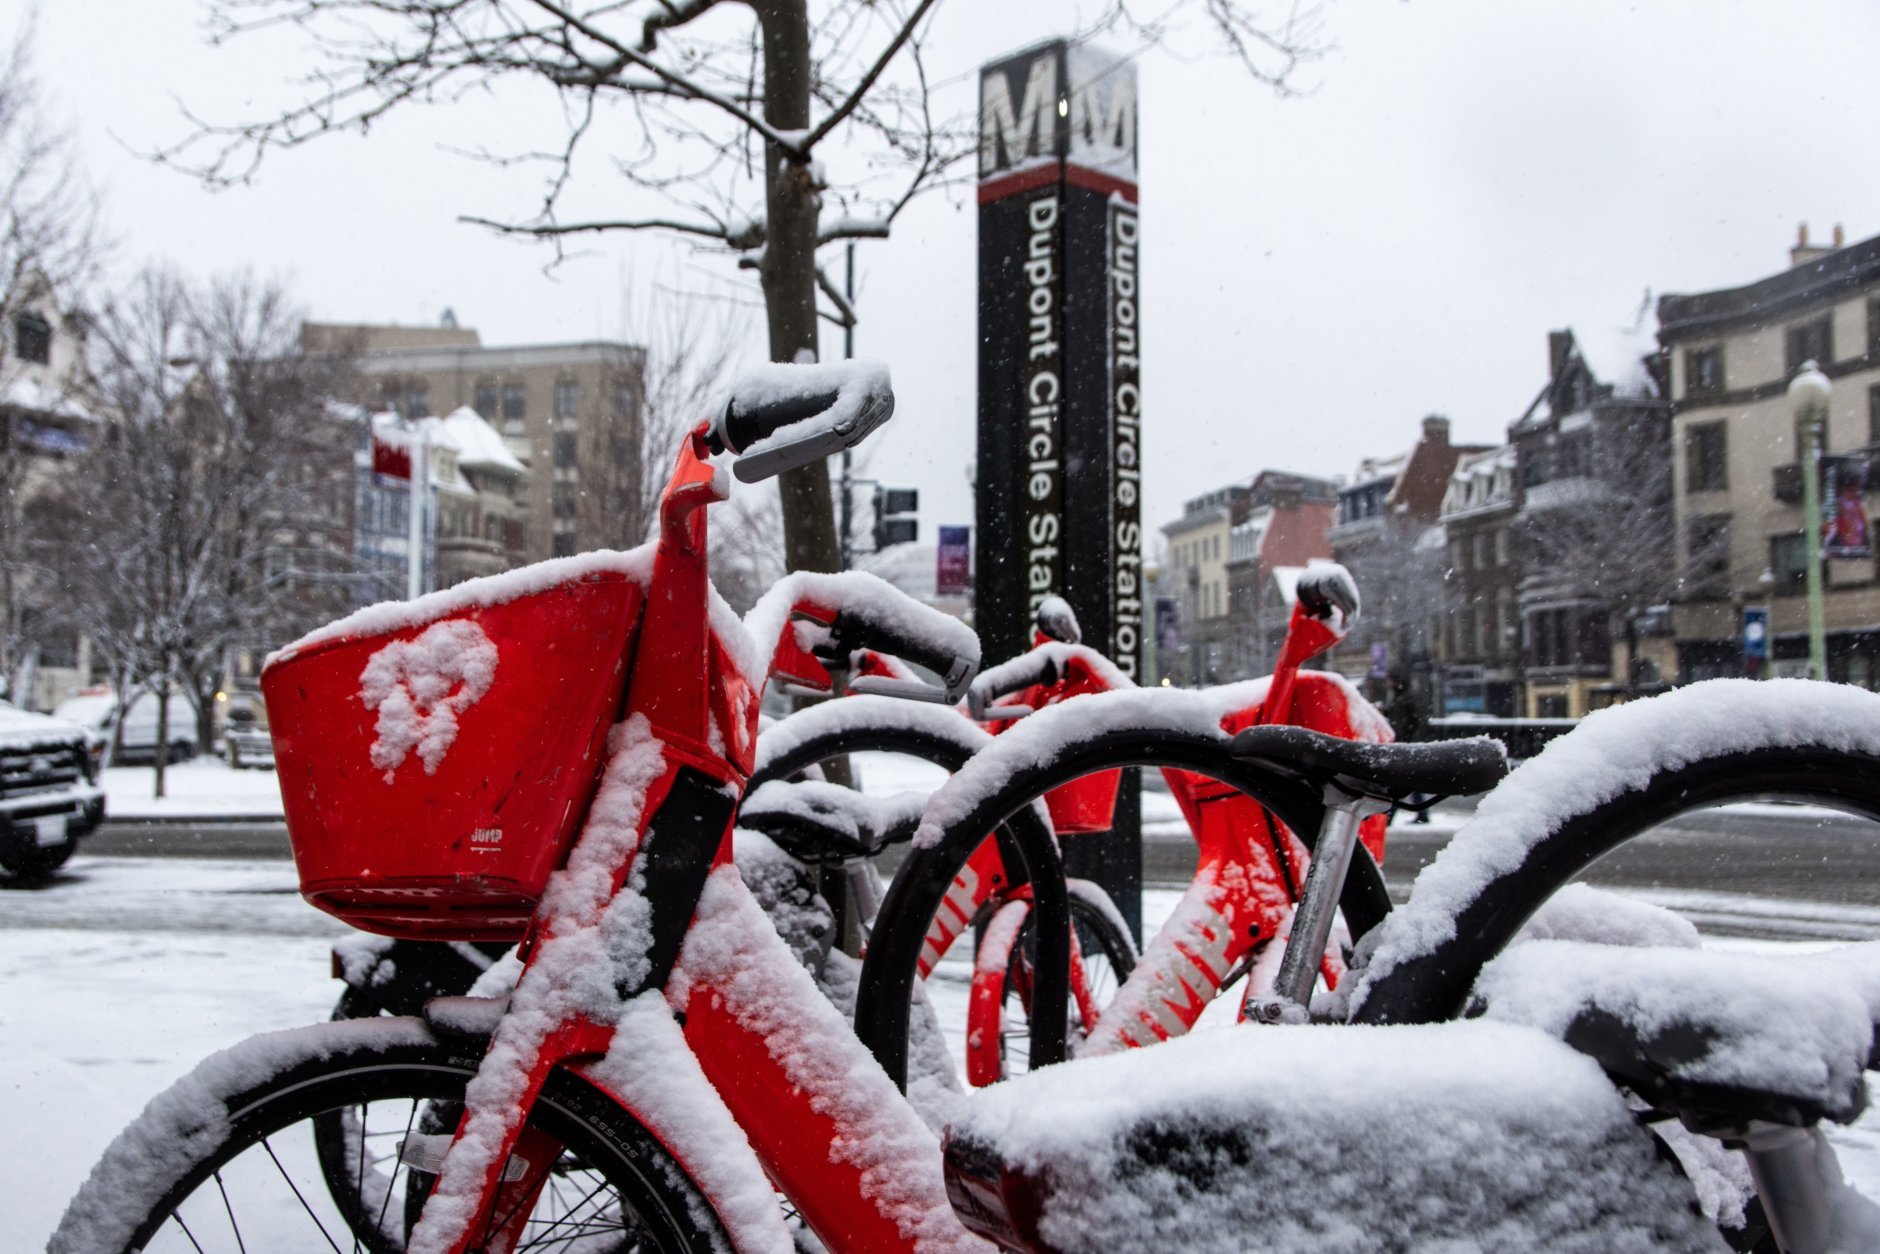 A Jump bikeshare outside the Dupont Circle Metro Station. Despite the snow, some people were seen using bikes on the sidewalk. (WTOP/Alejandro Alvarez)